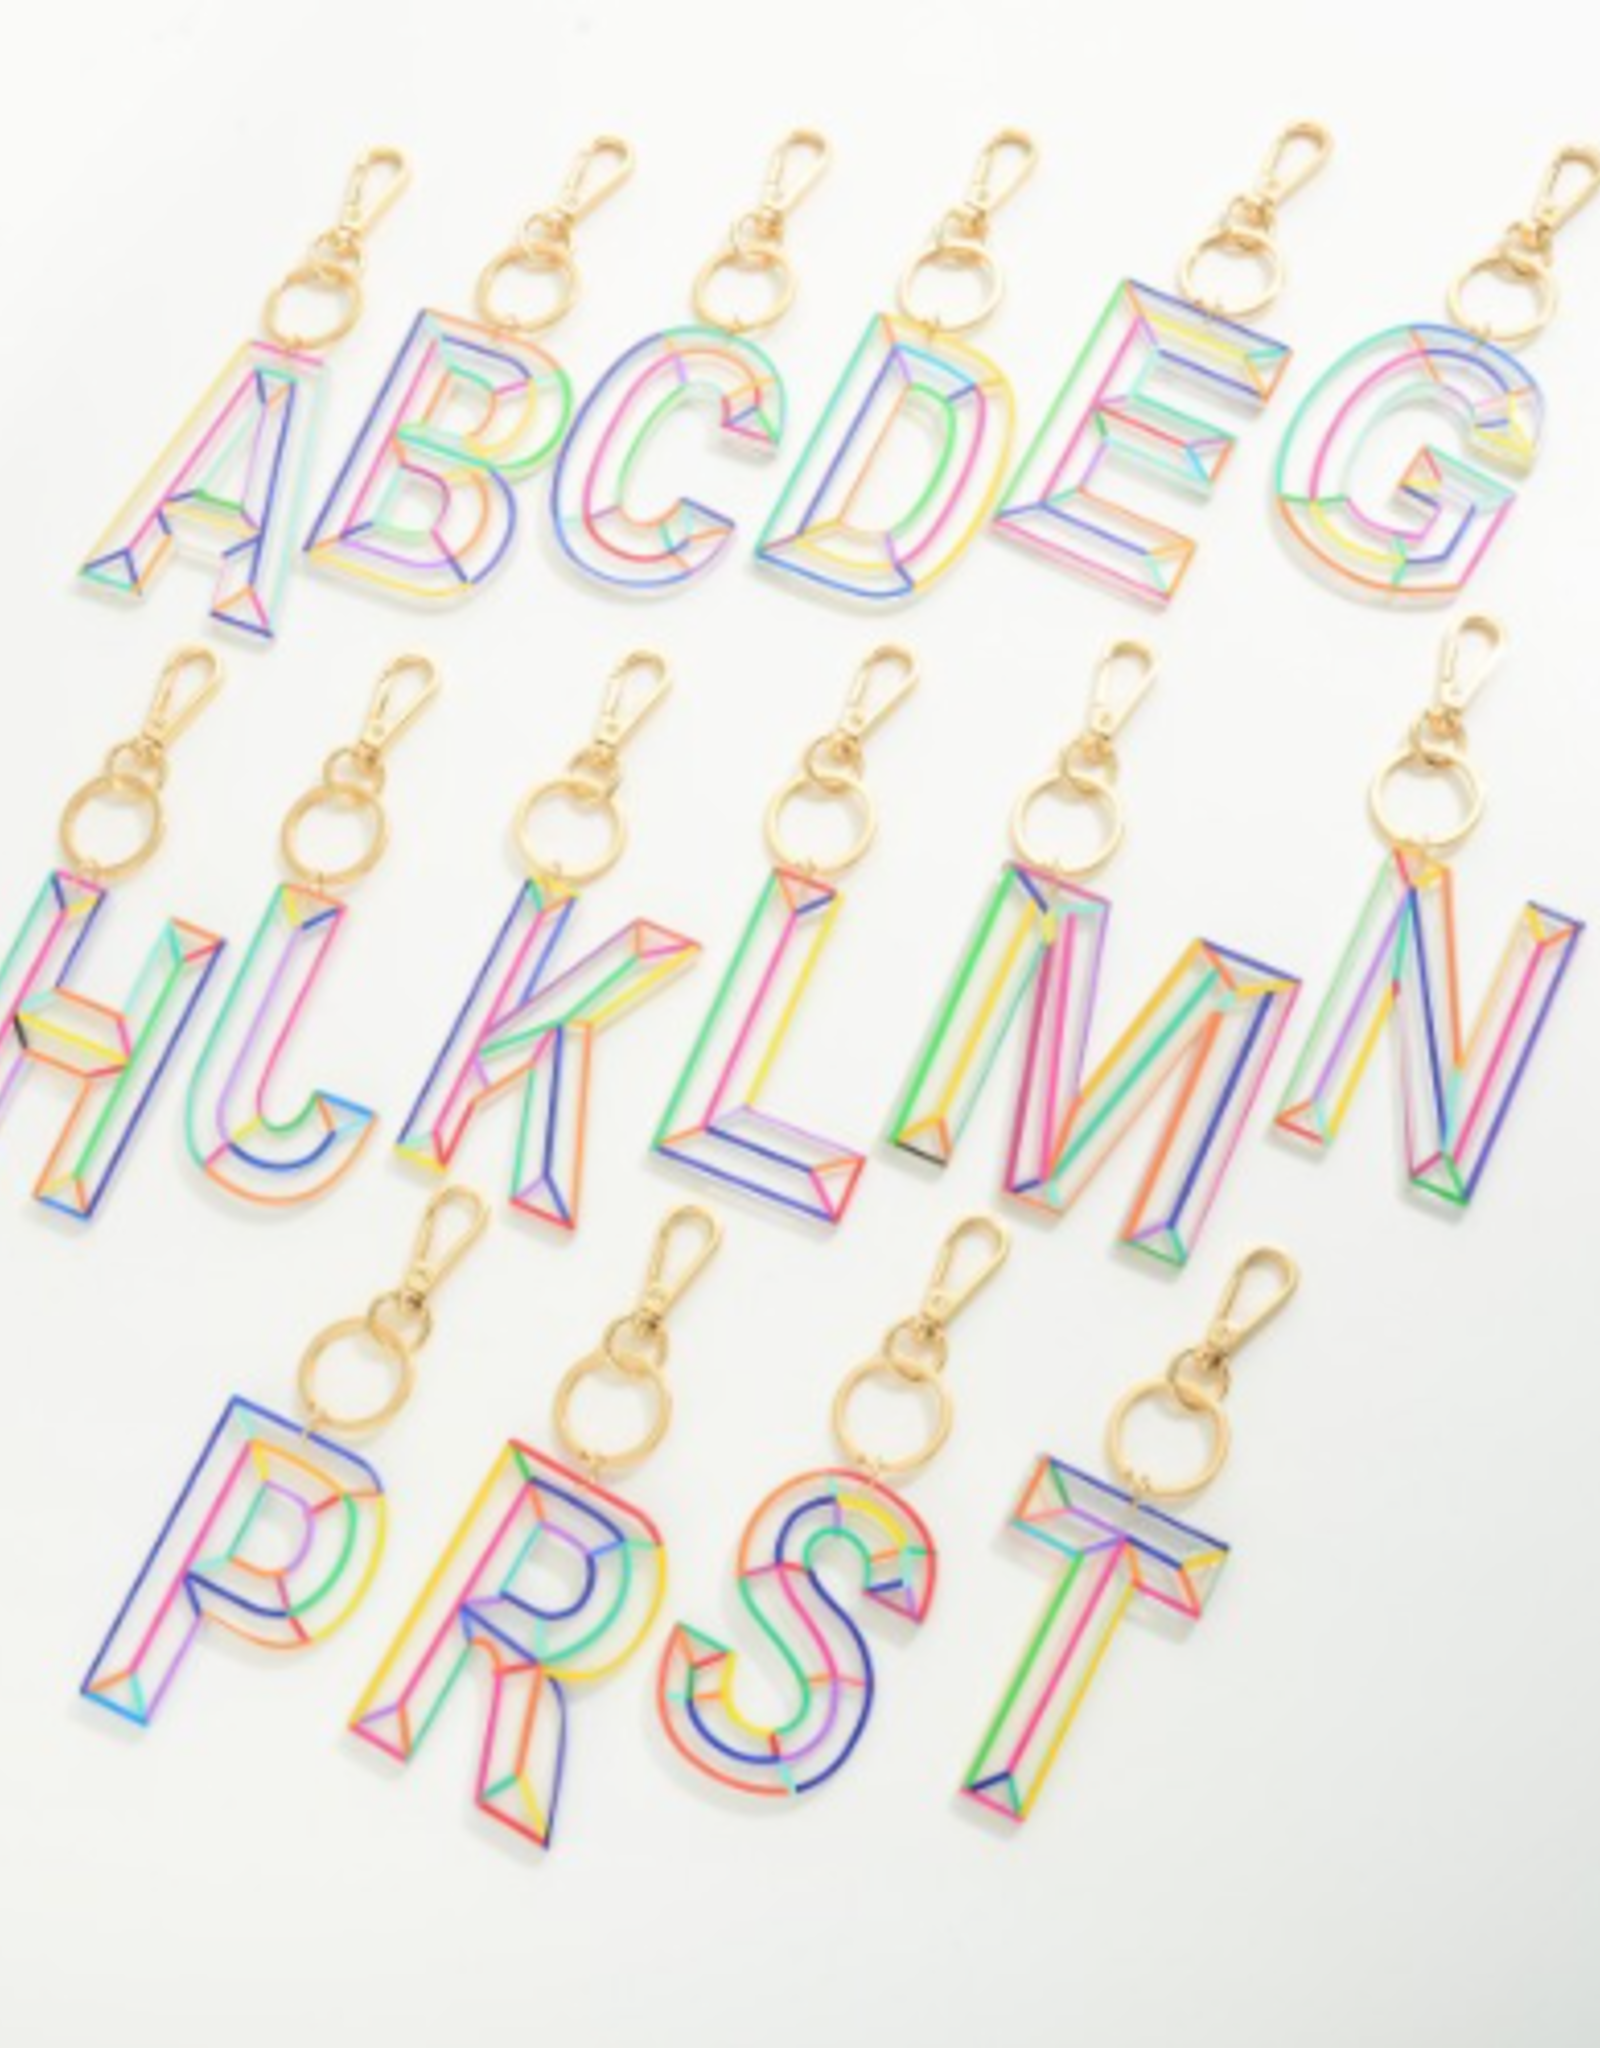 KEY CHAIN BRIGHT MULTI-COLORED RESIN INITIAL